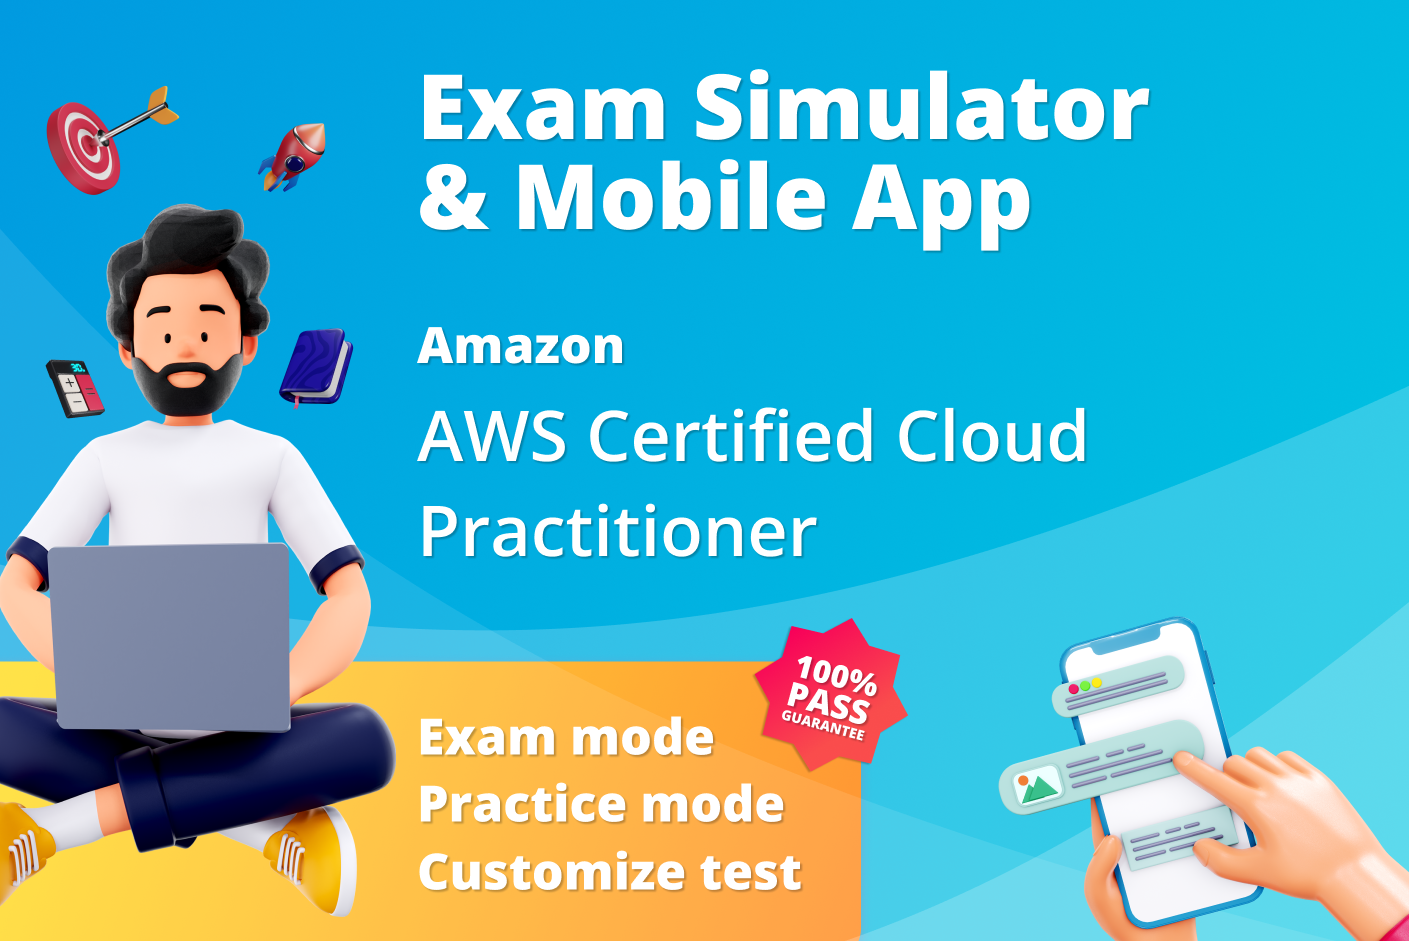 Get ready for your AWS Certified Cloud Practitioner exam with our comprehensive AWS Certified Cloud Practitioner mock exam